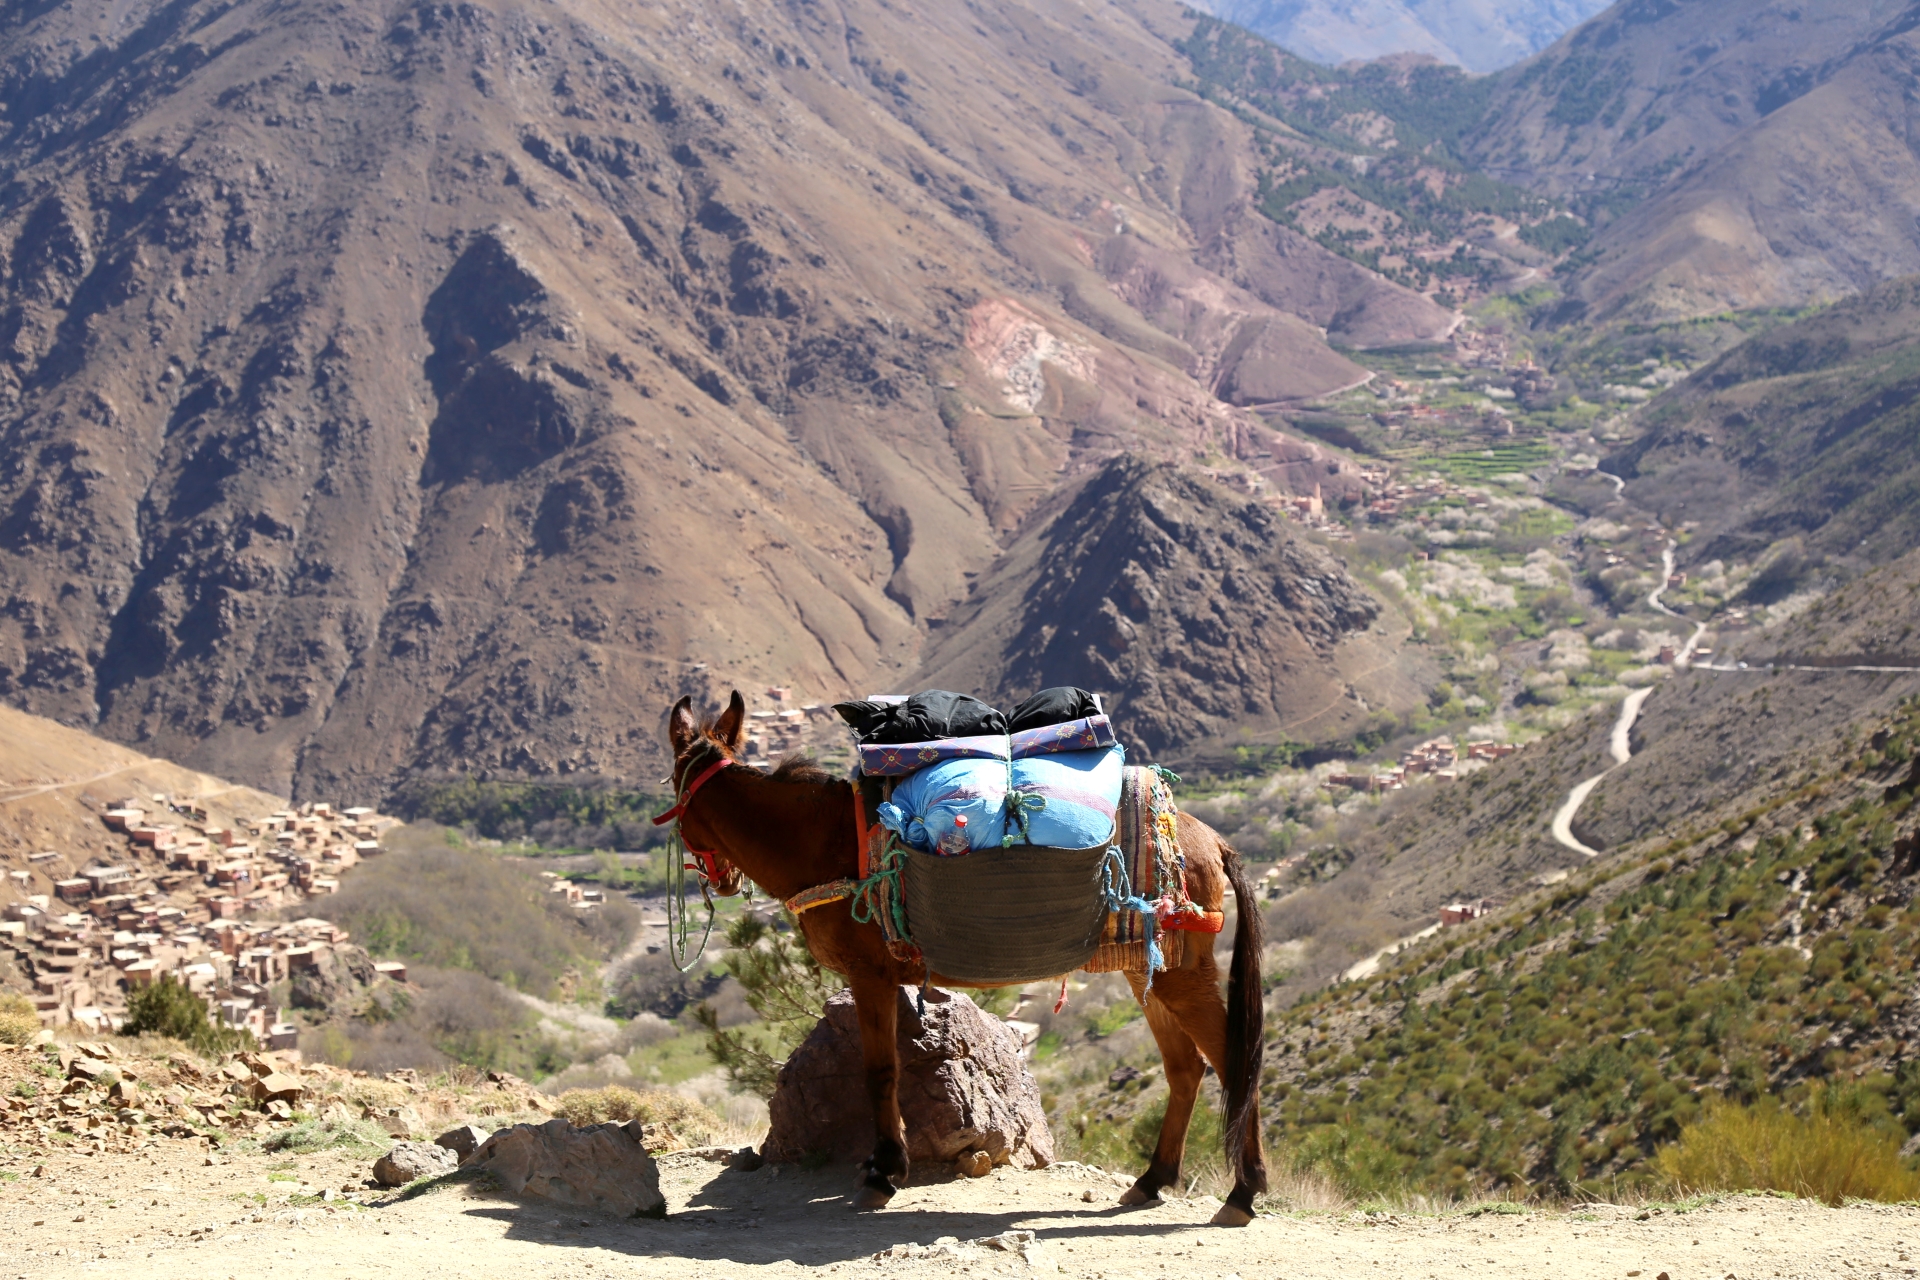 Mule in Atlas Mountains - Authentic Morocco